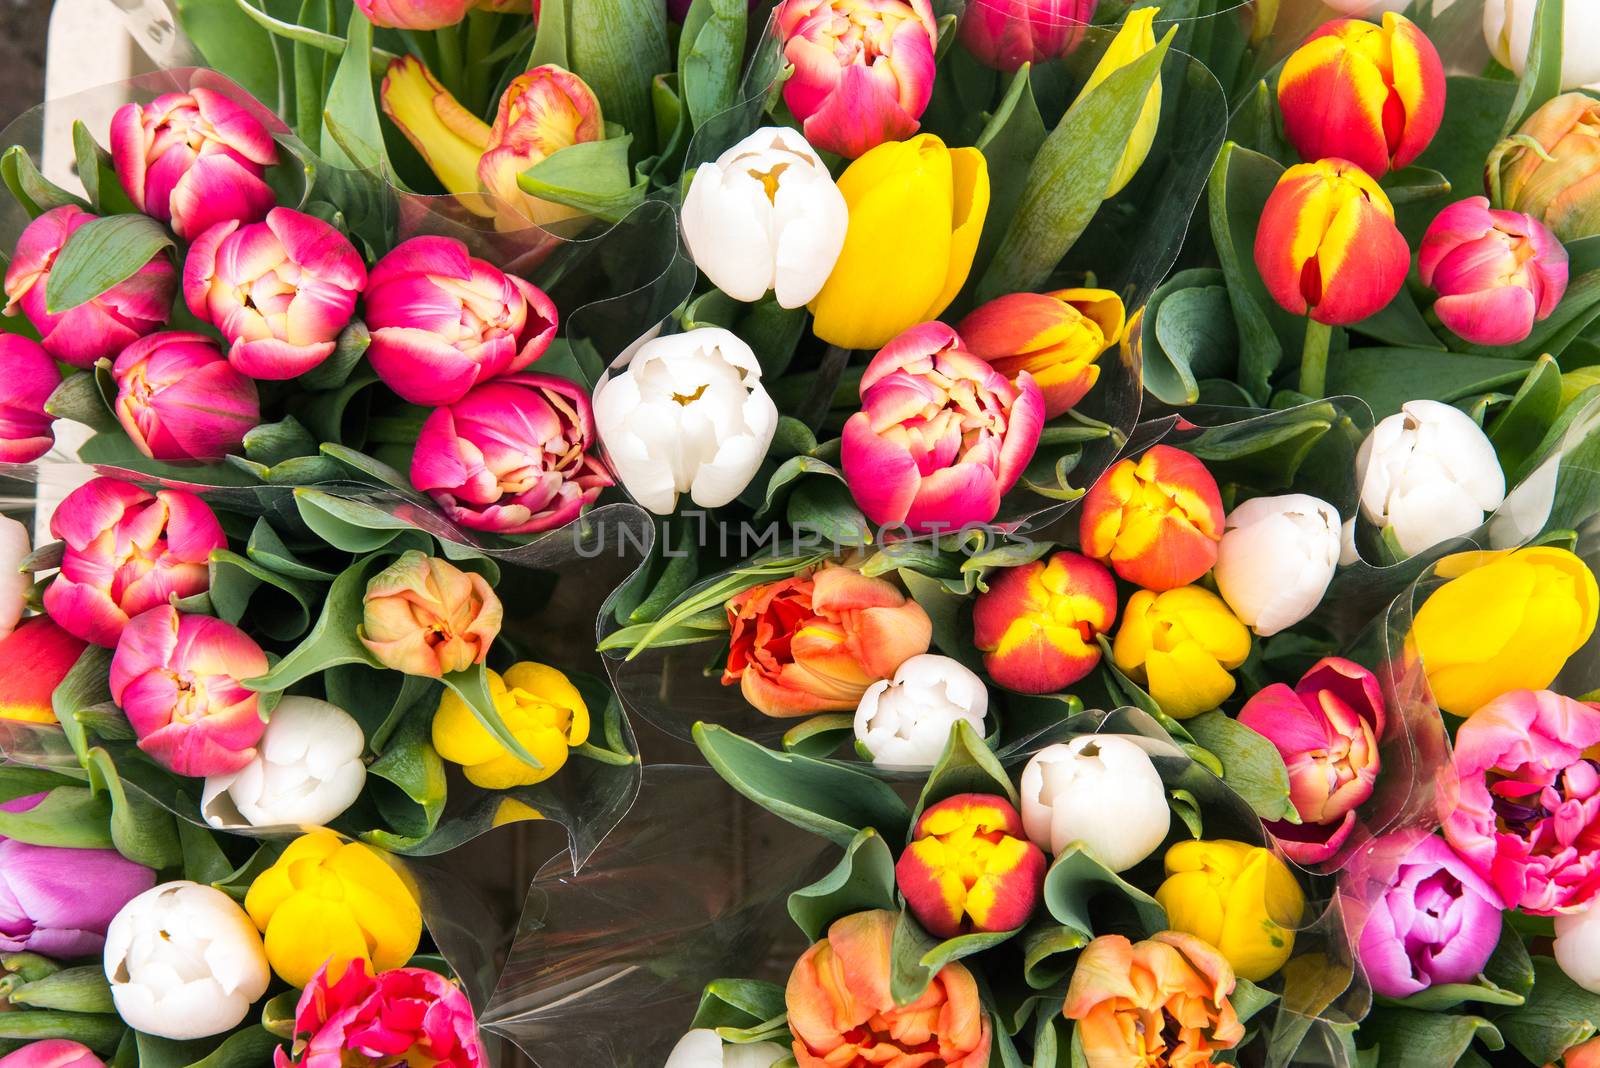 Tulips for sale at a markt by elxeneize